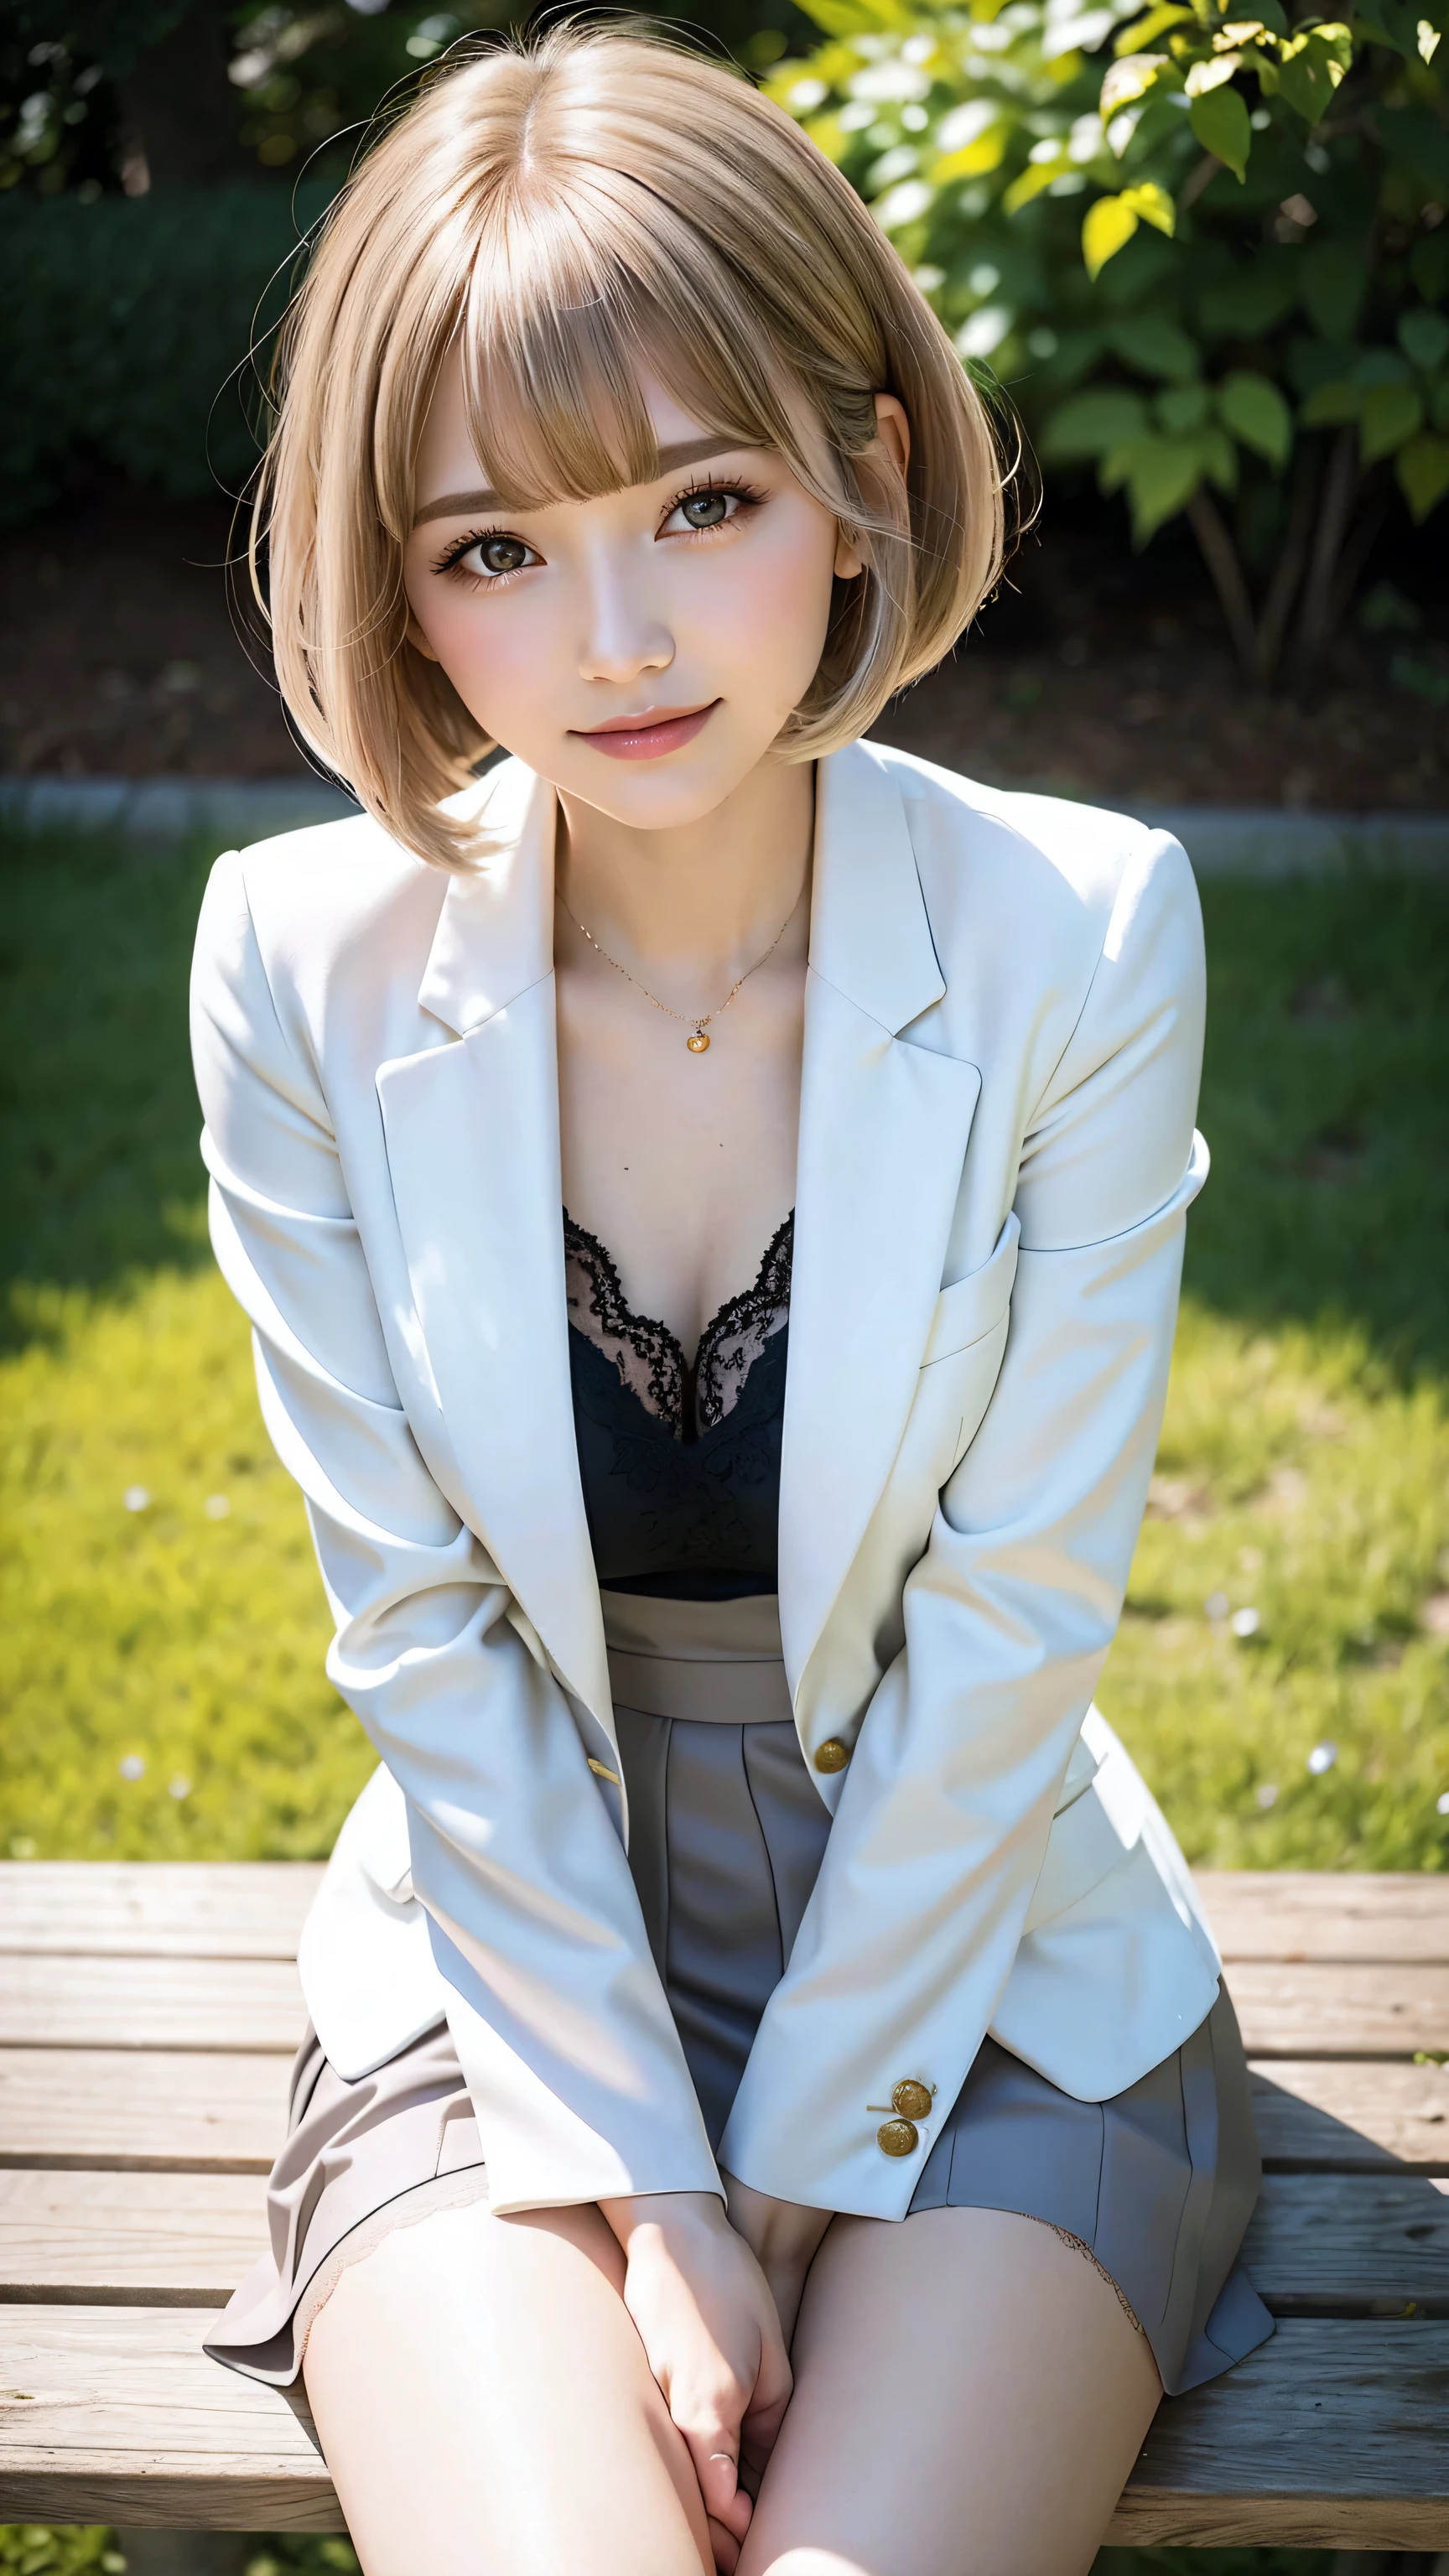 sunny day, Elegant photo of a girl in a blazer dress, (Puffy eyes:1.05), (White lace shirt), Platinum brown hair, (Angled Bob:1.4), Flat bangs, (Flowing hair), smile, Happy, happiness, Skin with attention to detail, Skin pores, A beautiful innocent symmetrical face, Long eyelashes, Black eyeliner, Light gold eyeshadow,(Sit on a bench), Crossed_feet, Emotional, Wind, garden, wood, Grass, masterpiece, highest quality, Realistic,Bobcut